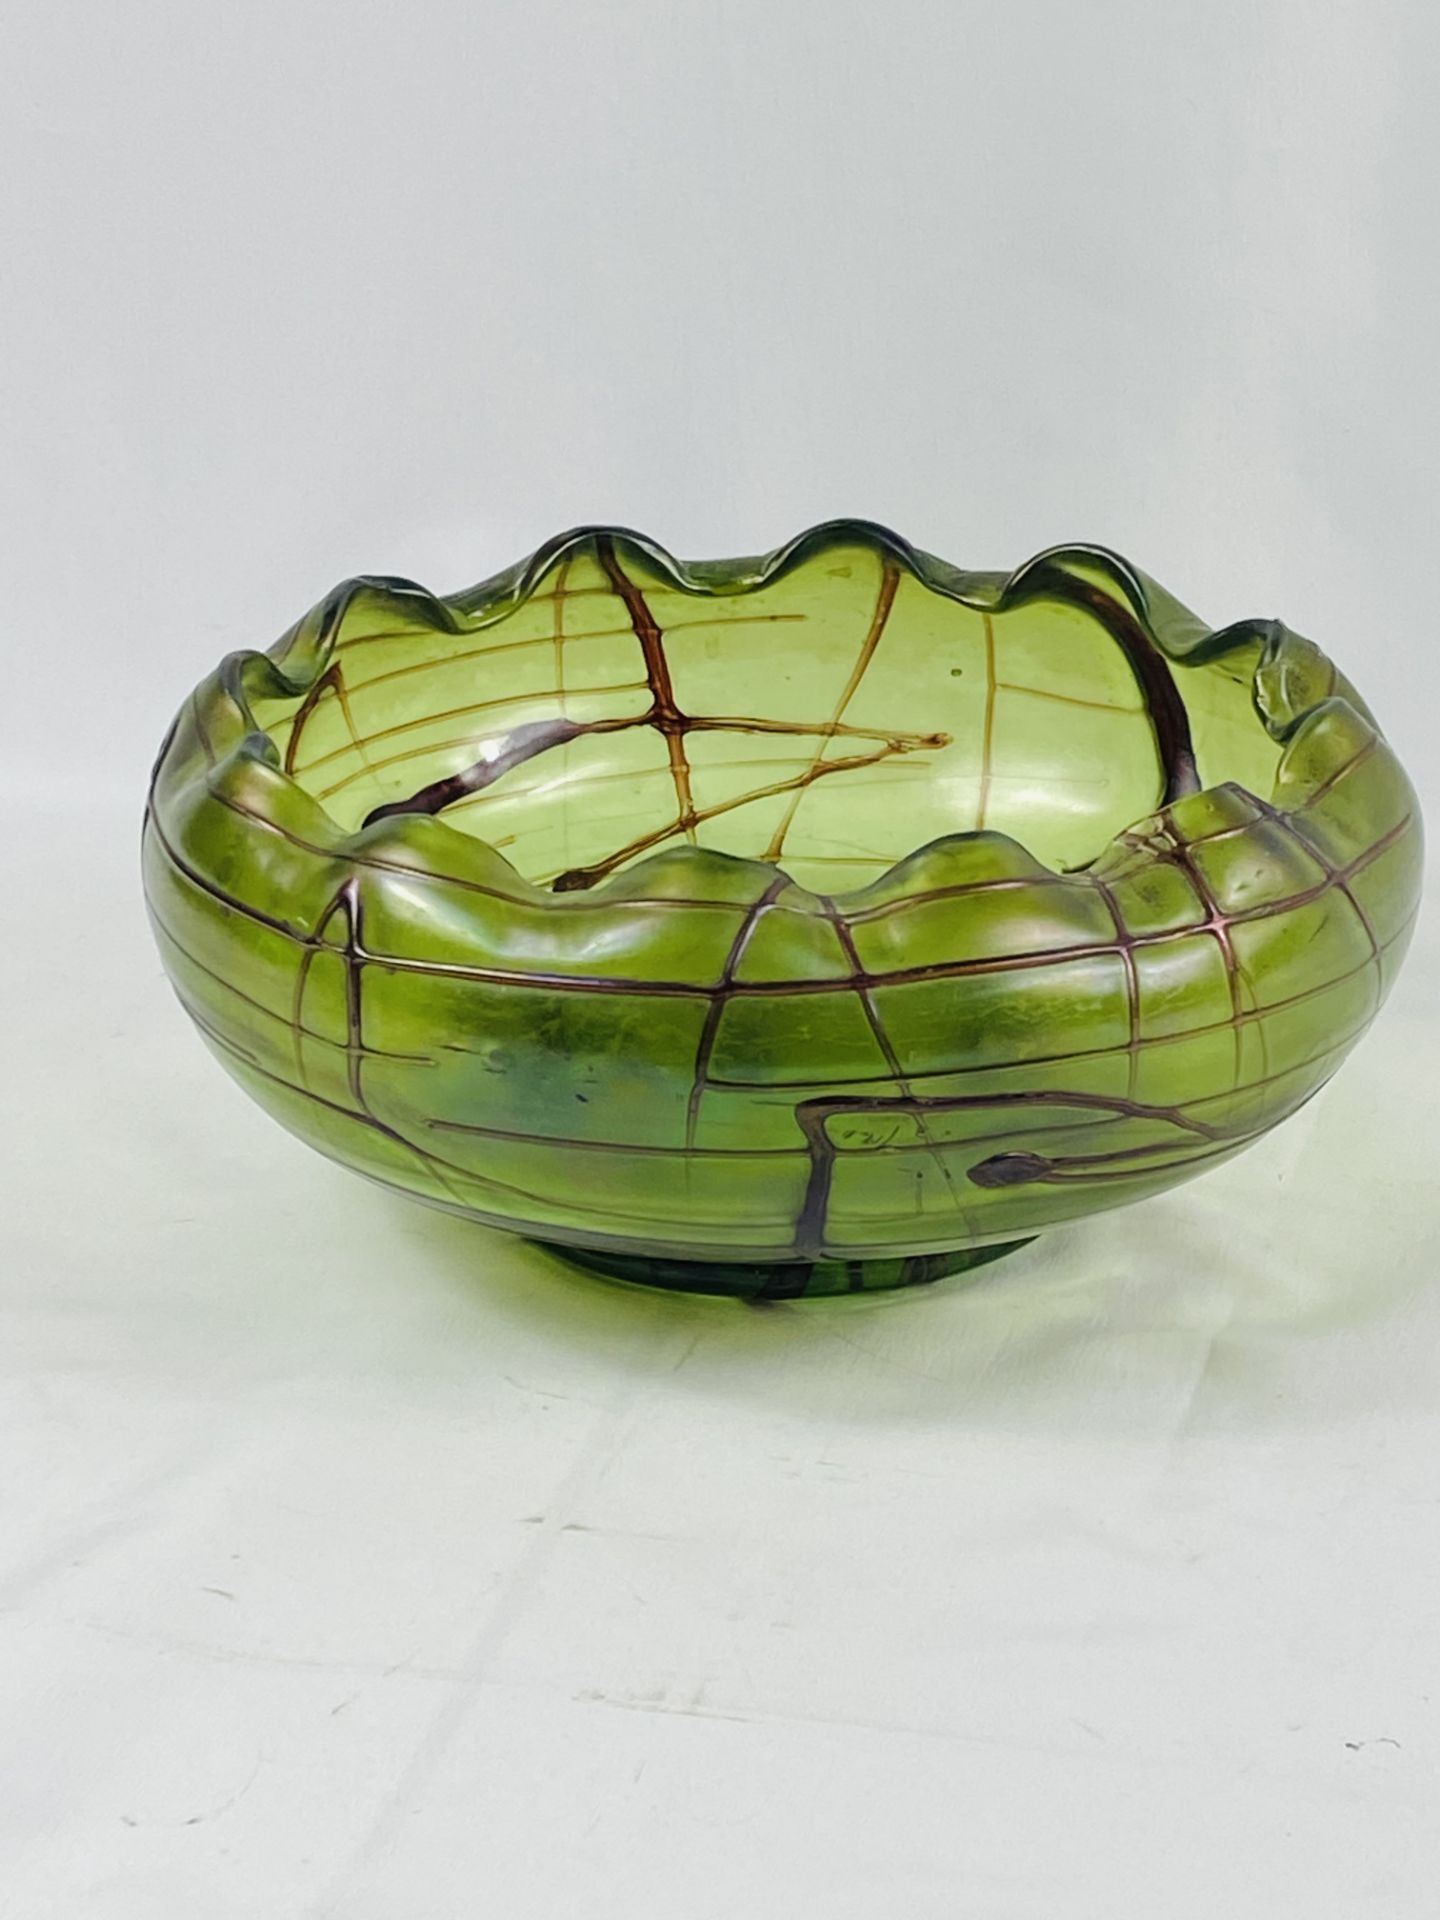 Green glass sgraffito style bowl with scalloped rim - Image 2 of 7